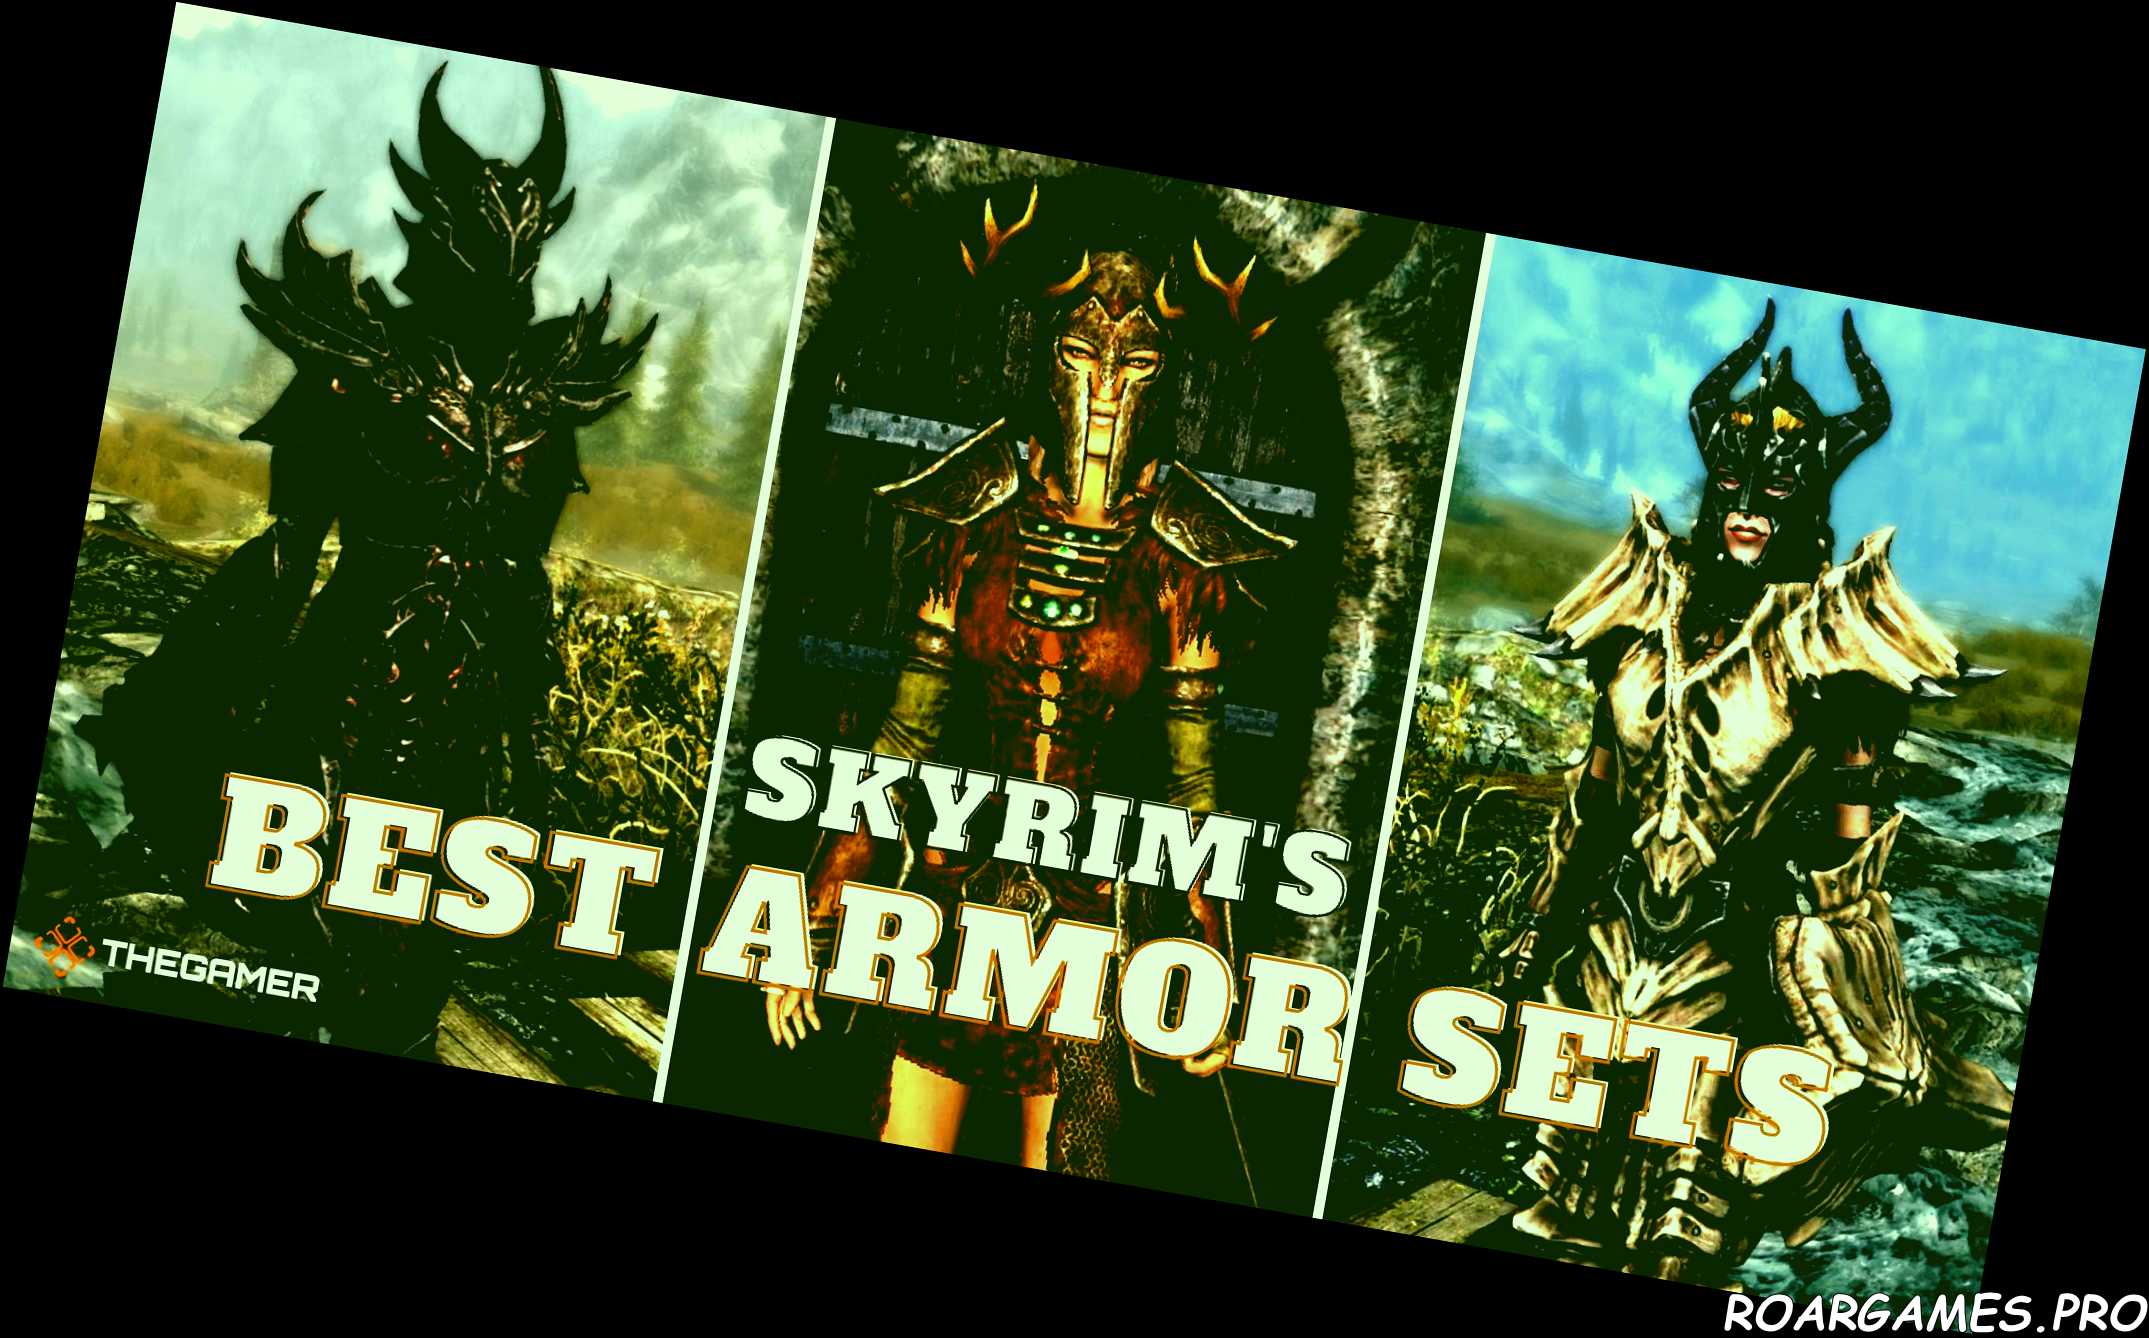 Skyrim 10 Best Armor Sets How To Find Them Split Image of Three players wearing armor sets Dragonplate right Ahzidals centre Daedric left